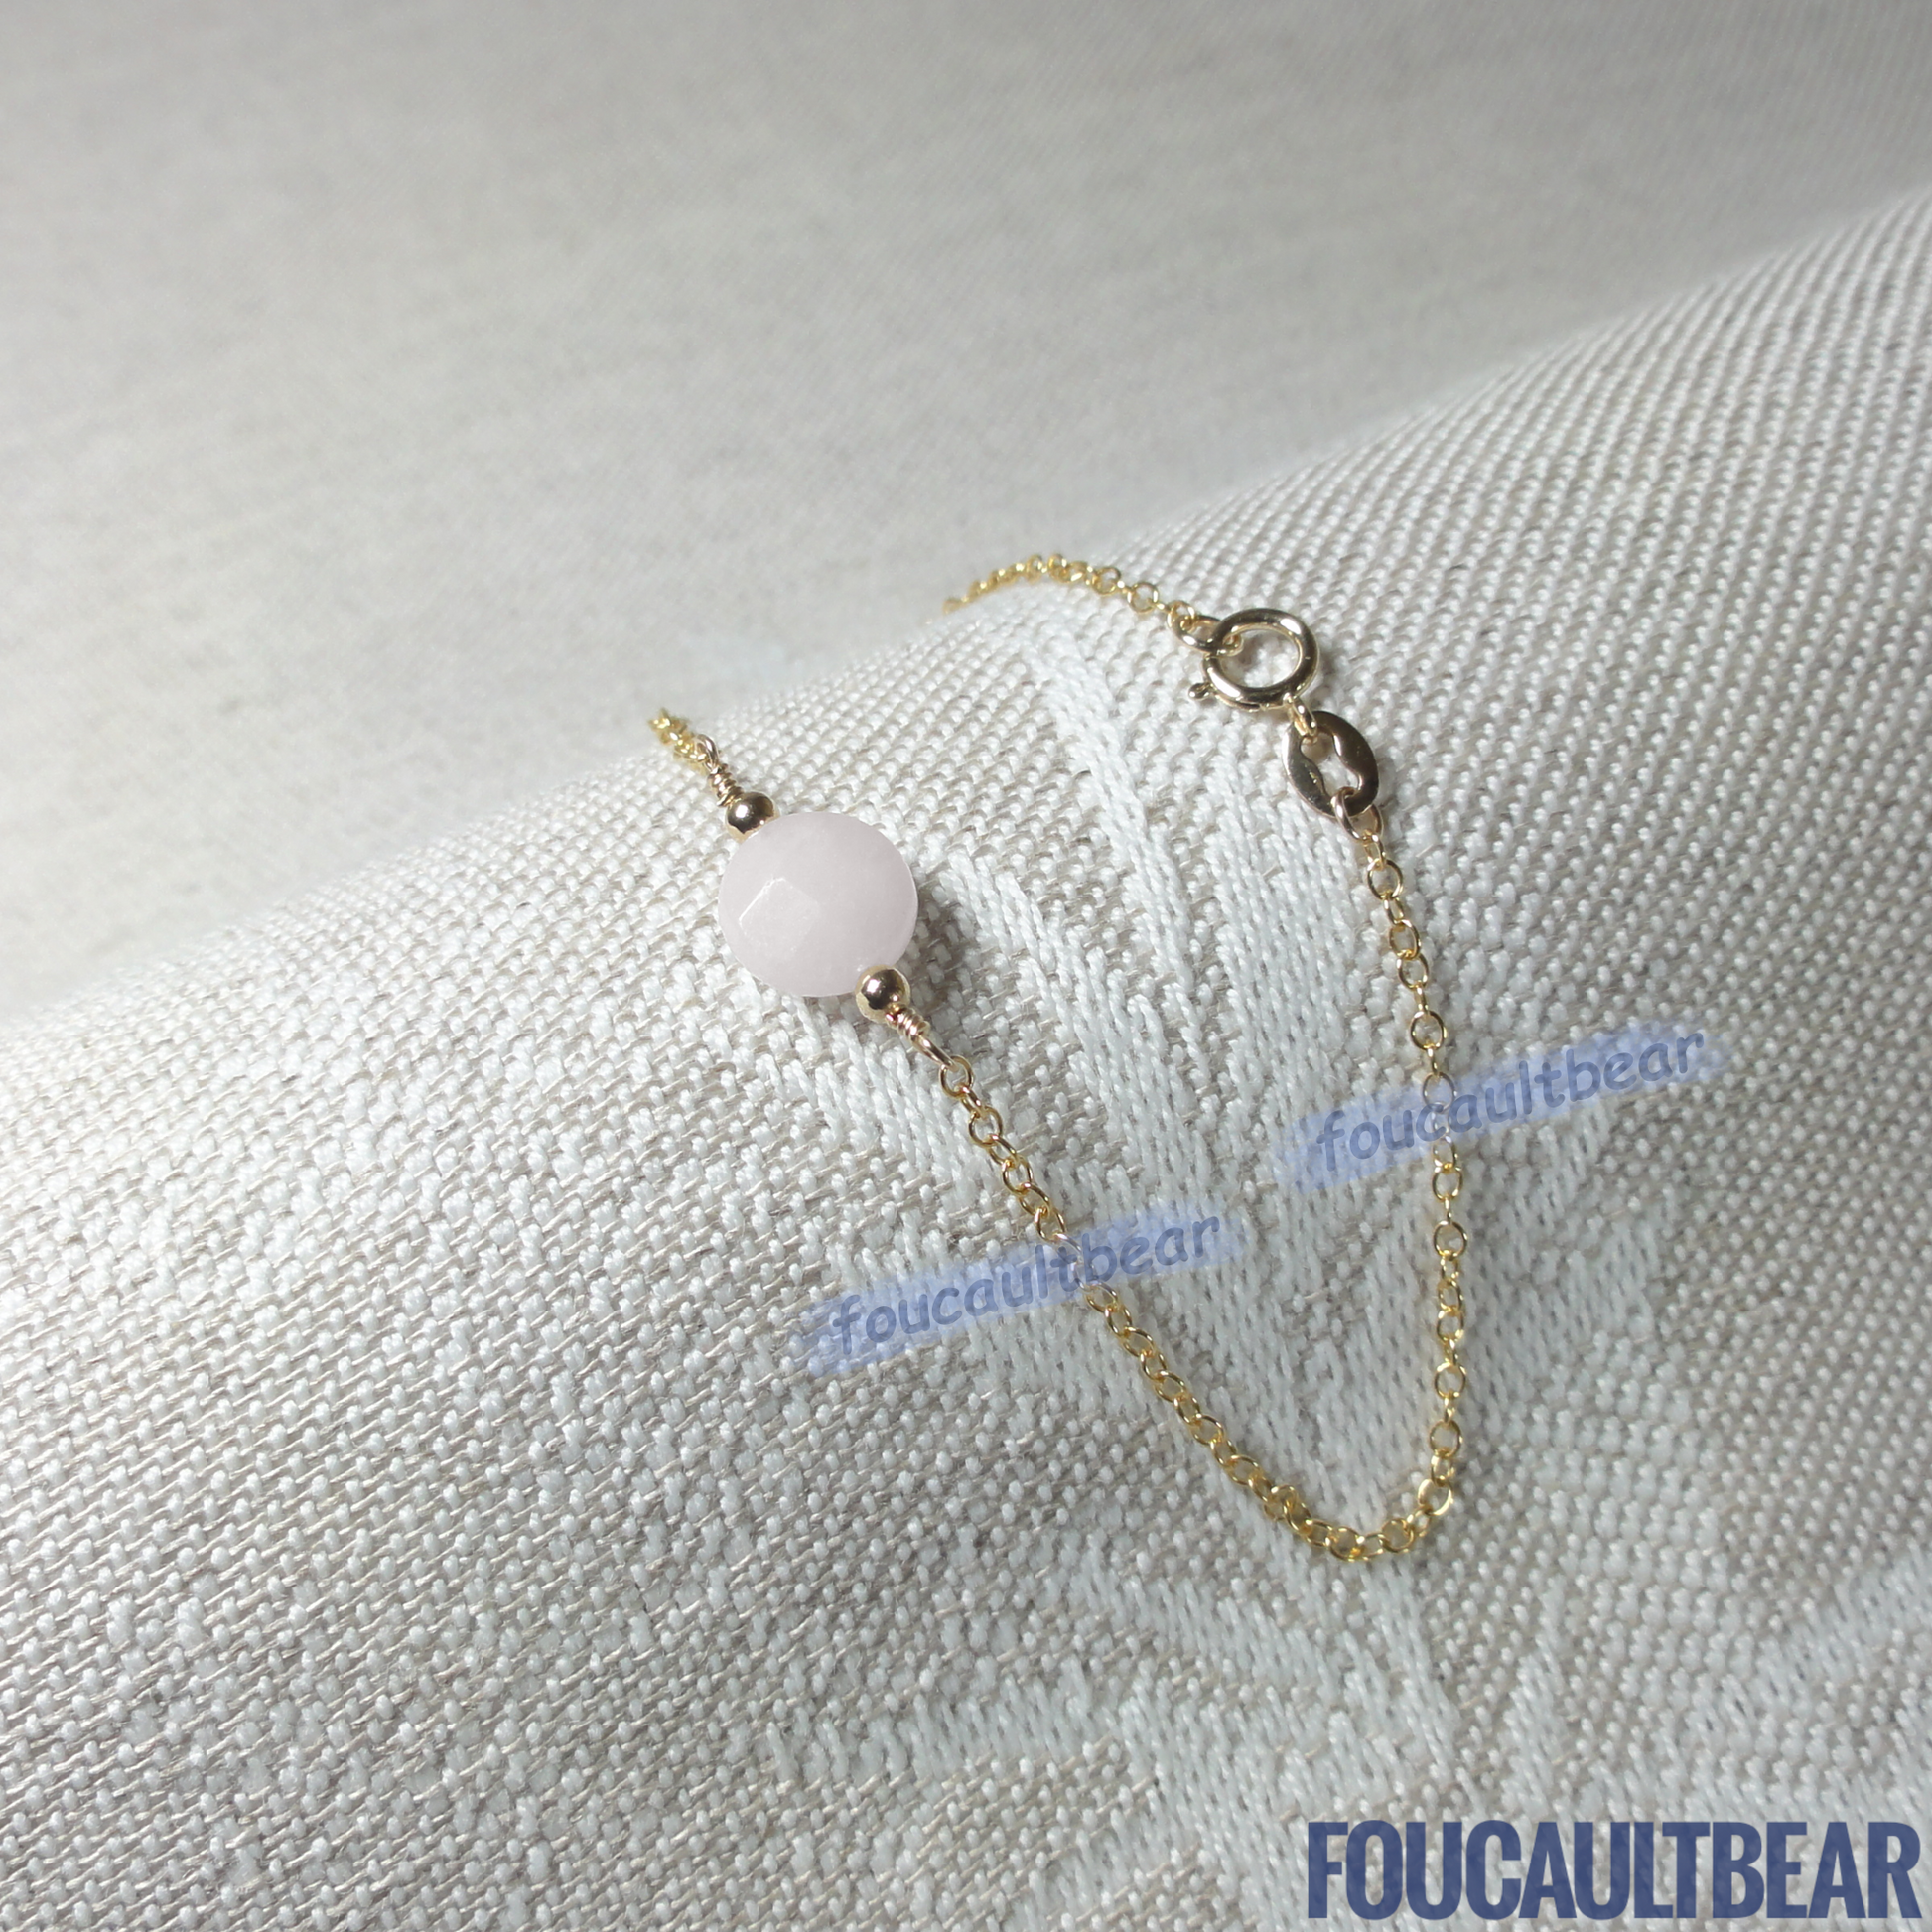 Foucaultbear's HANDCRAFTED BRACELET. Natural Pale Pink Opal. All 14kt Gold-Filled Components. Custom Lengths Available. Natural Pale Pink Opal with 14kt Gold-Filled Bracelet is simple yet exudes subtle elegance to one's wardrobe. Can be worn on casual days and holds up well for dressed-up evenings. Makes for a wonderful wedding party or bridesmaid gift too. Please choose the bracelet length you would like. 